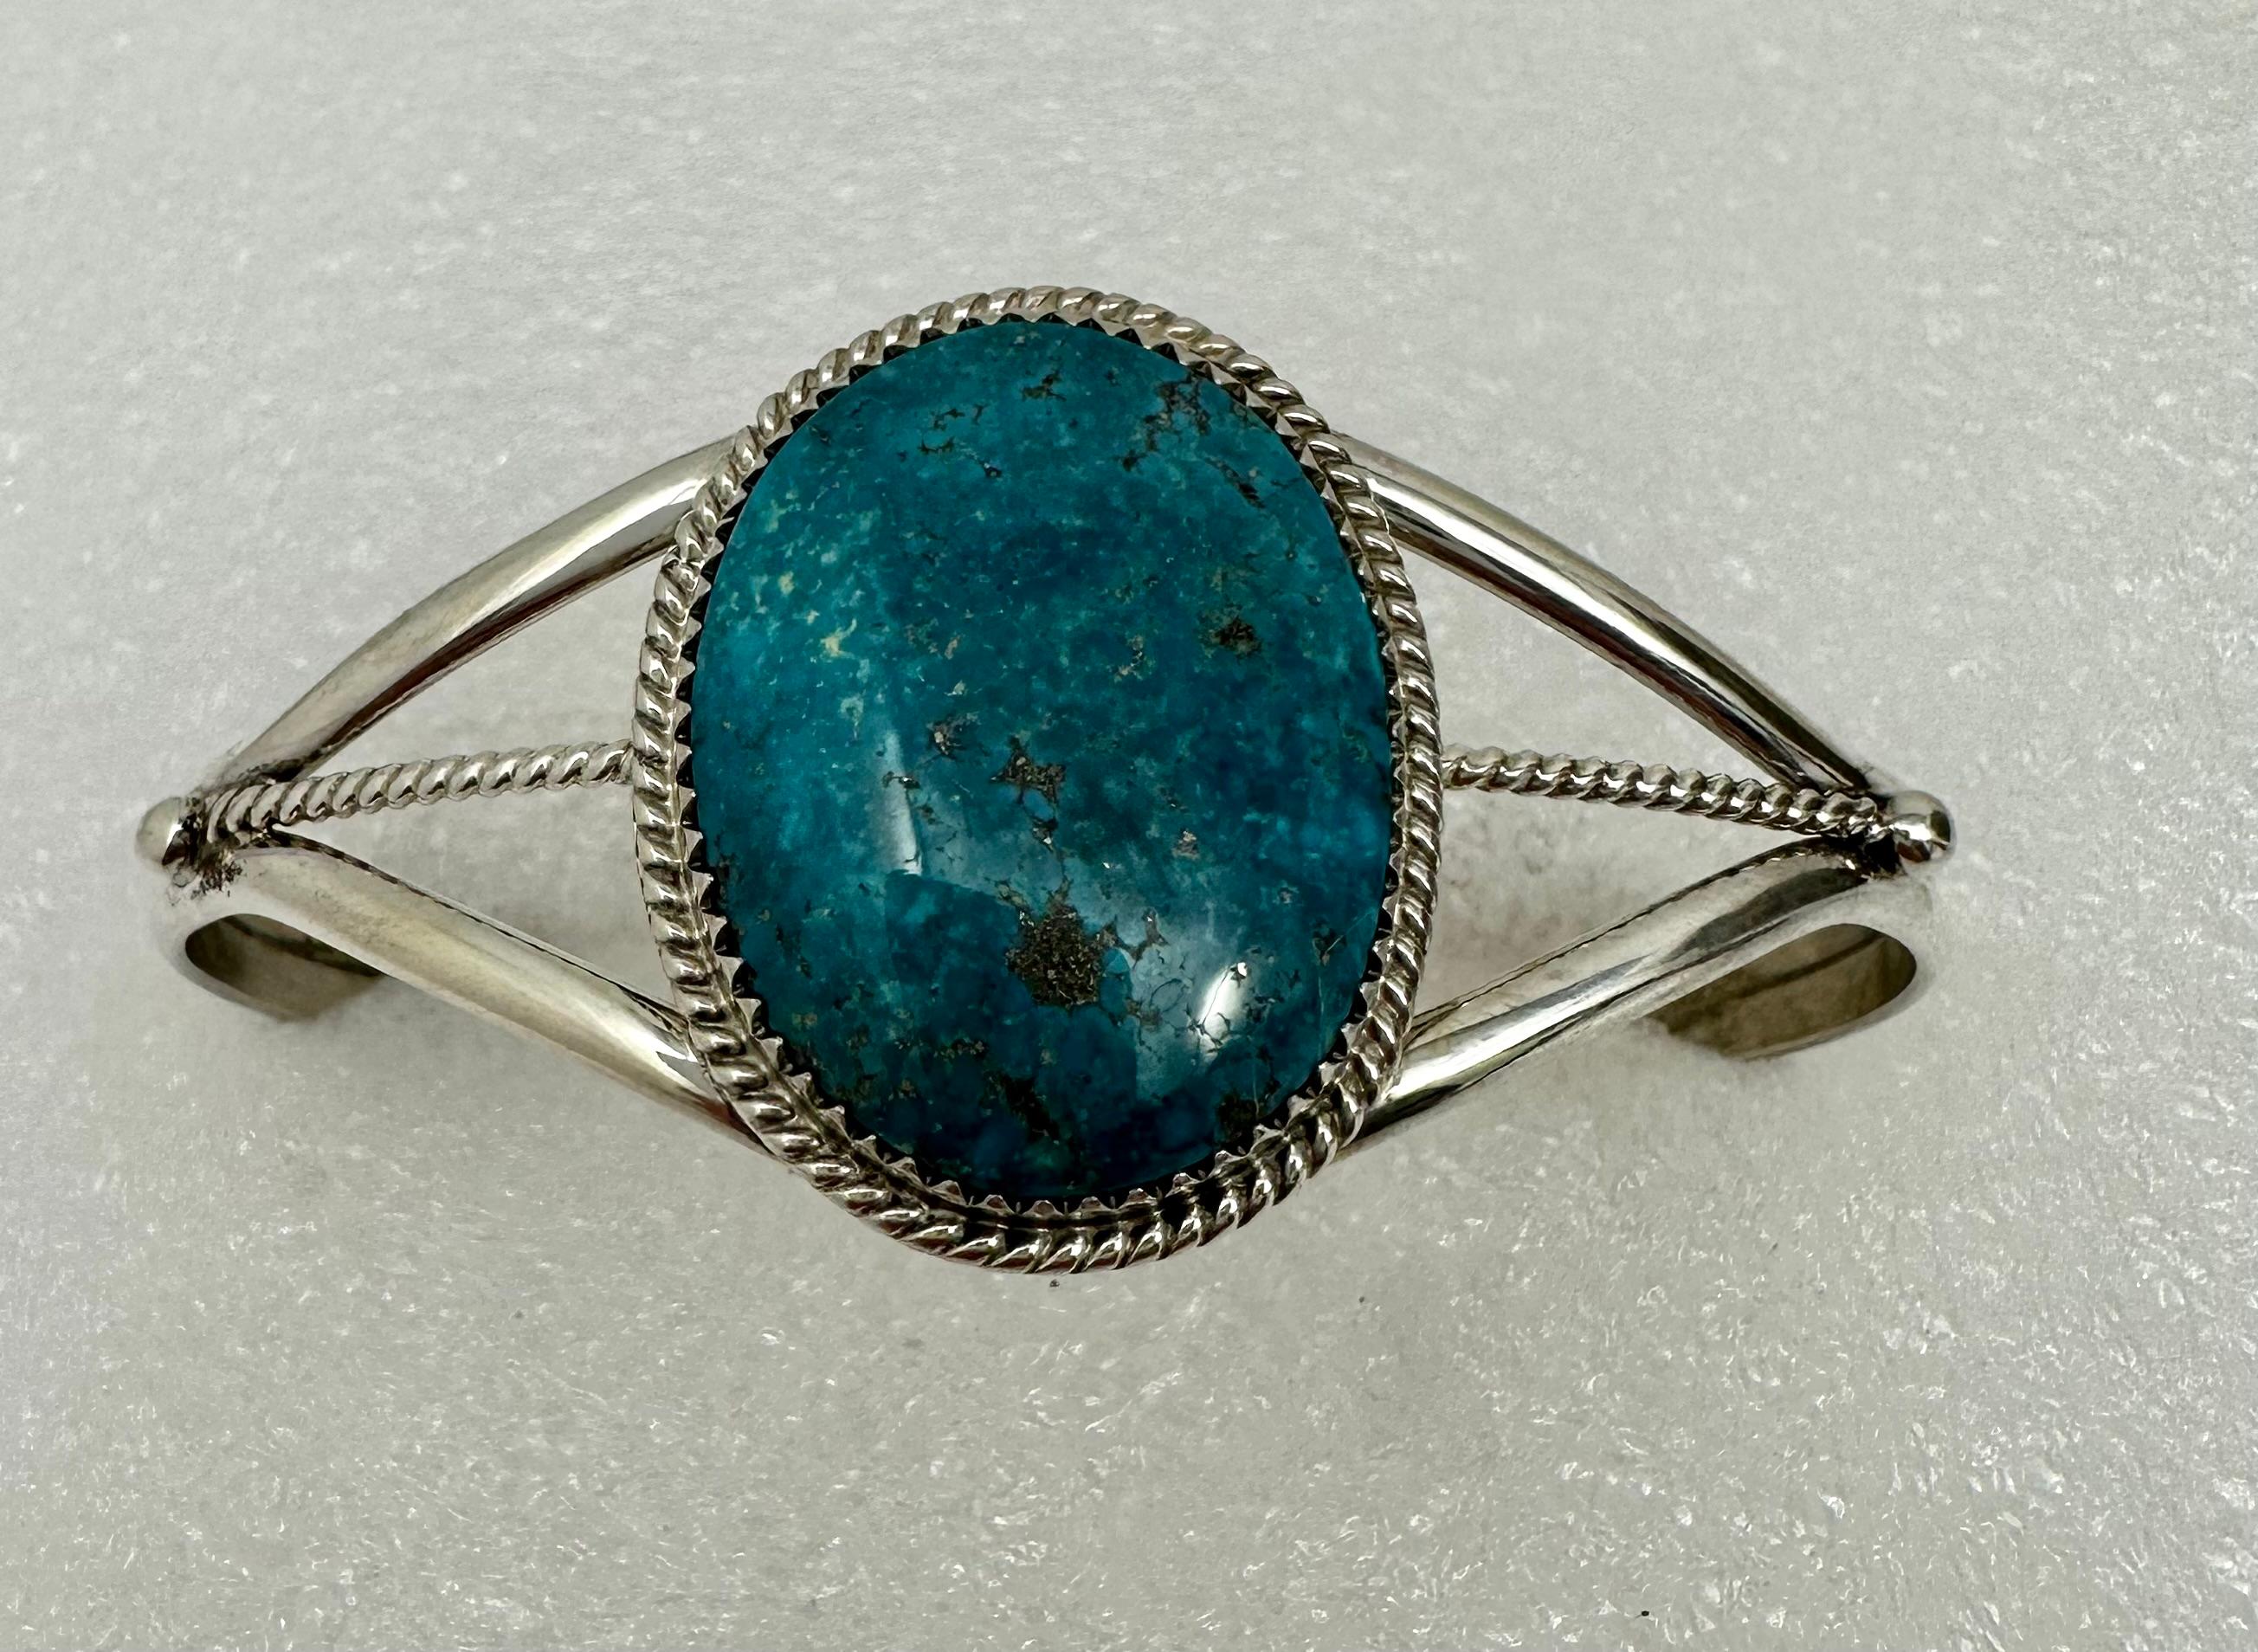 Sterling Silver and Birdseye Turquoise Cuff Bracelet 
Signed by Navajo Artist Phillip Yazzie
Birdseye Turquoise 1